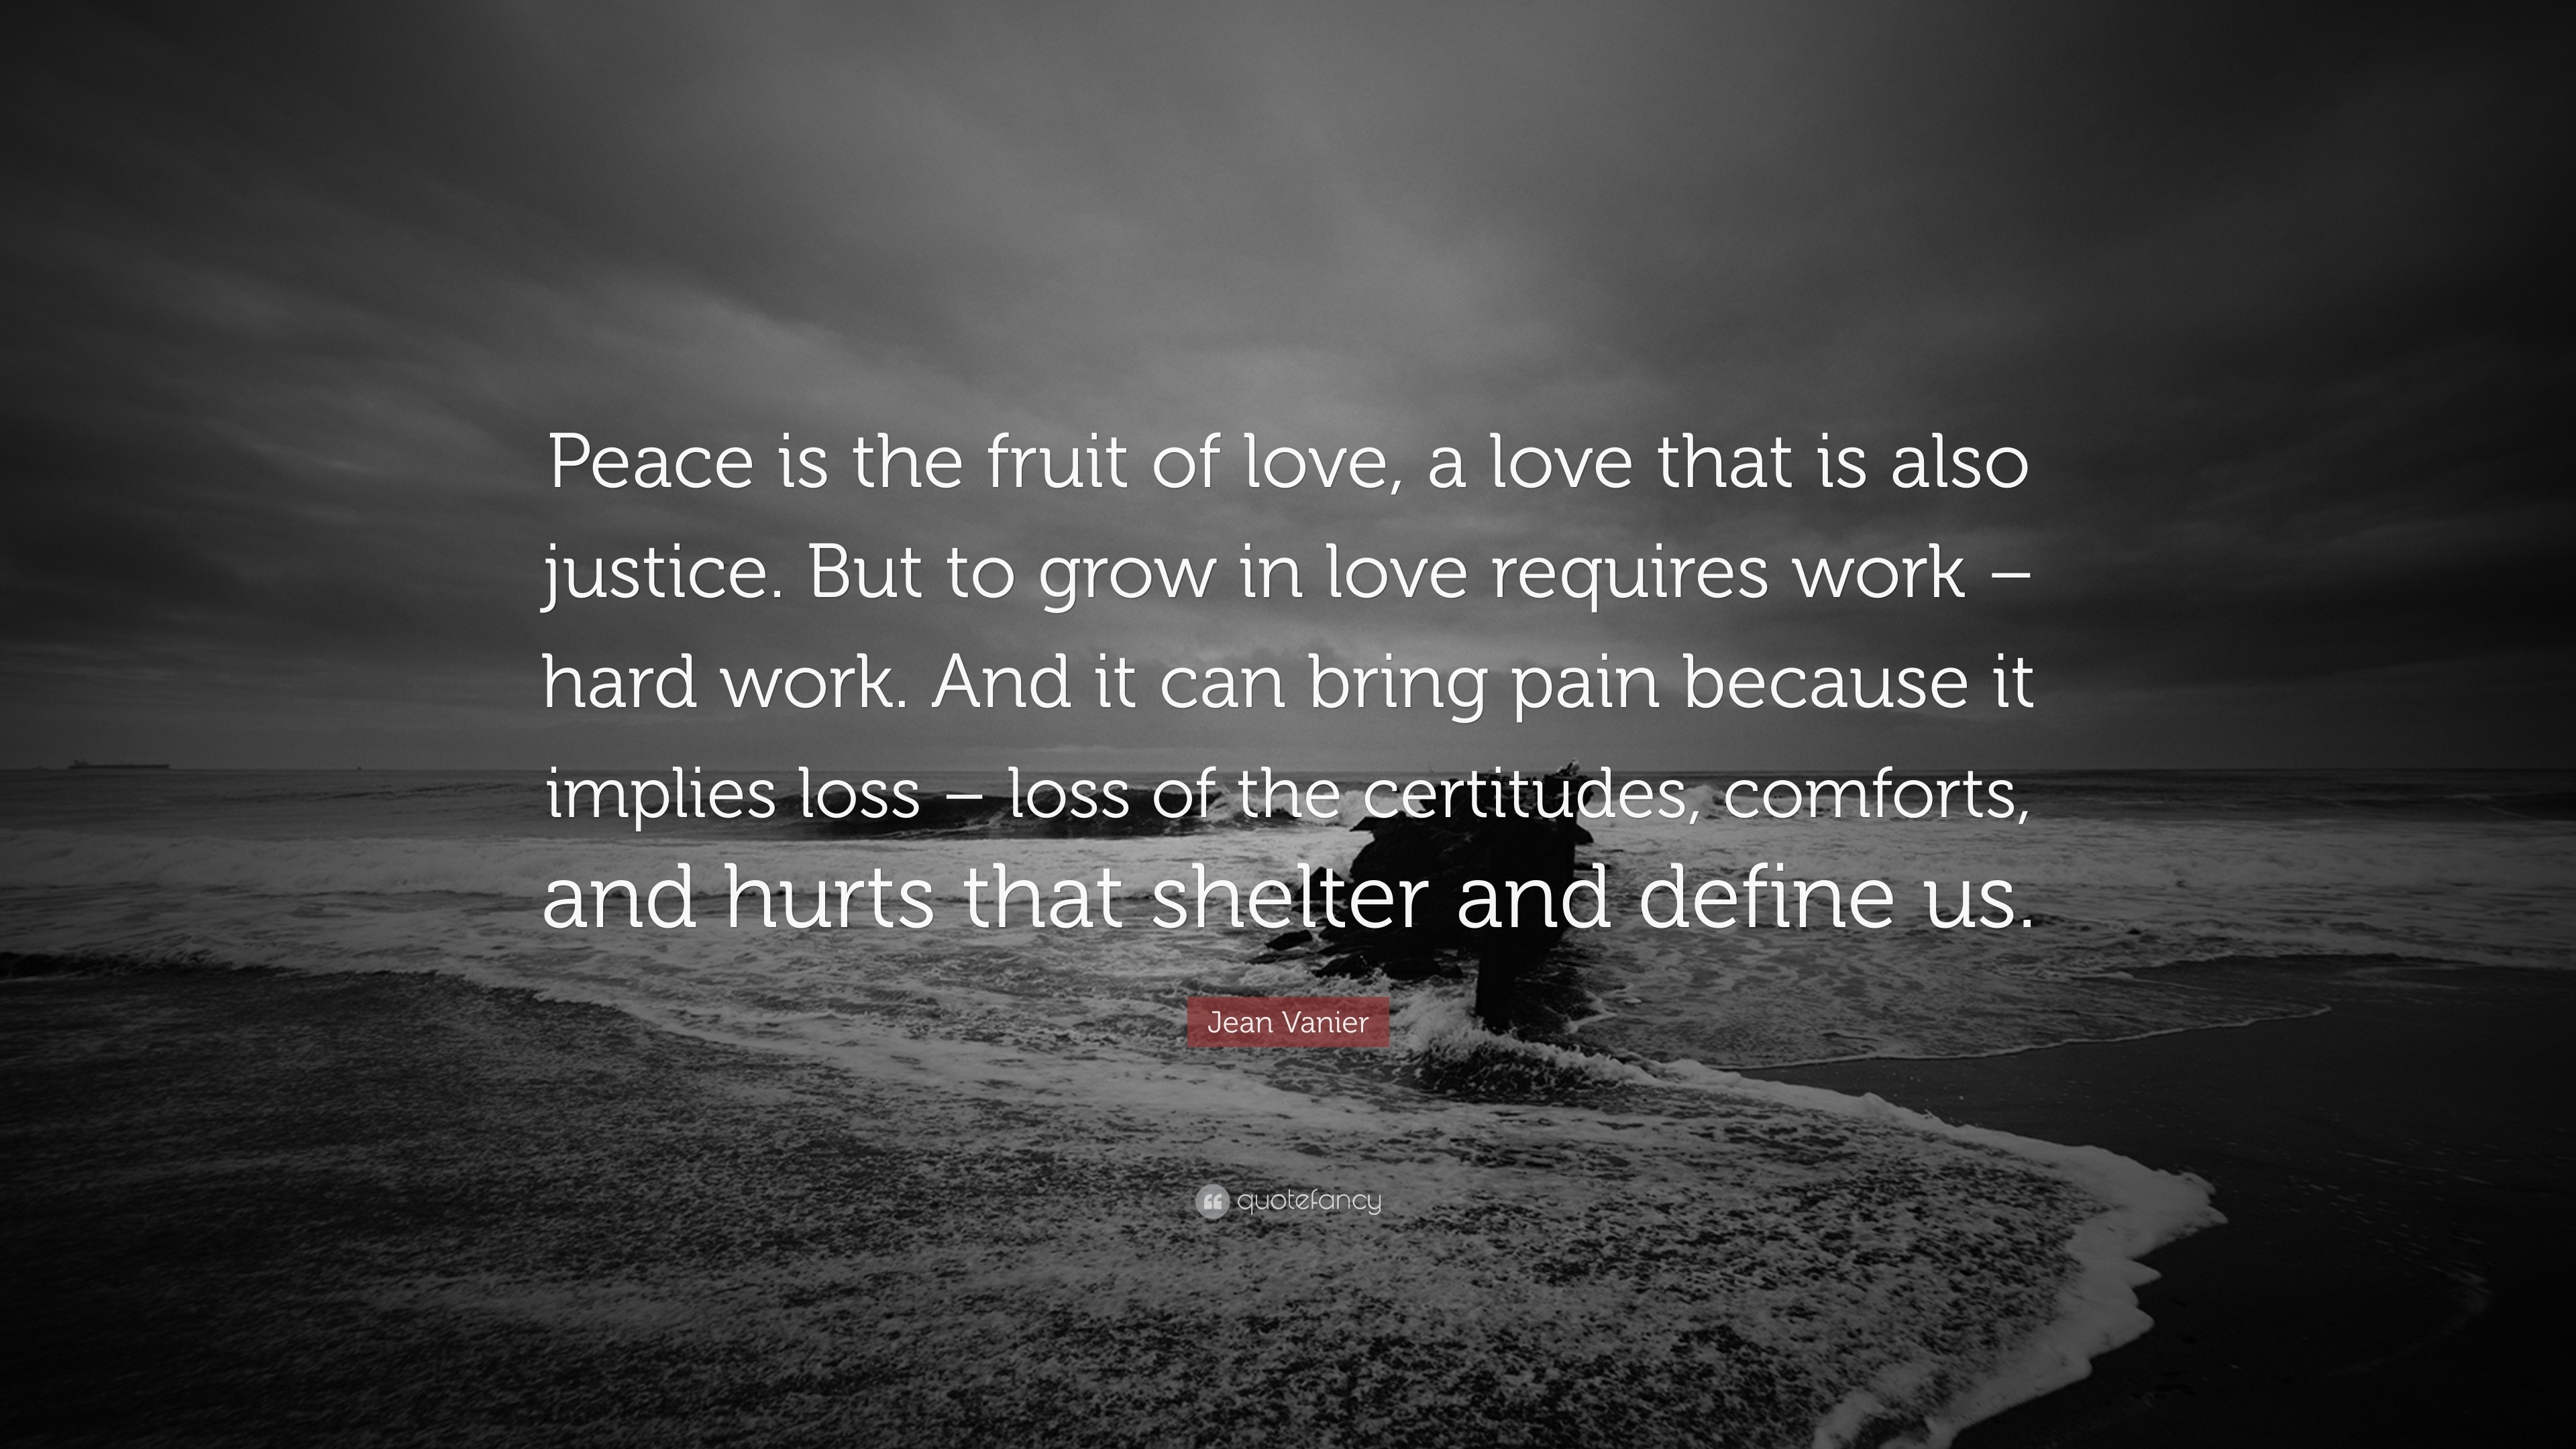 3840x2160 Jean Vanier Quote: “Peace is the fruit of love, a love that is